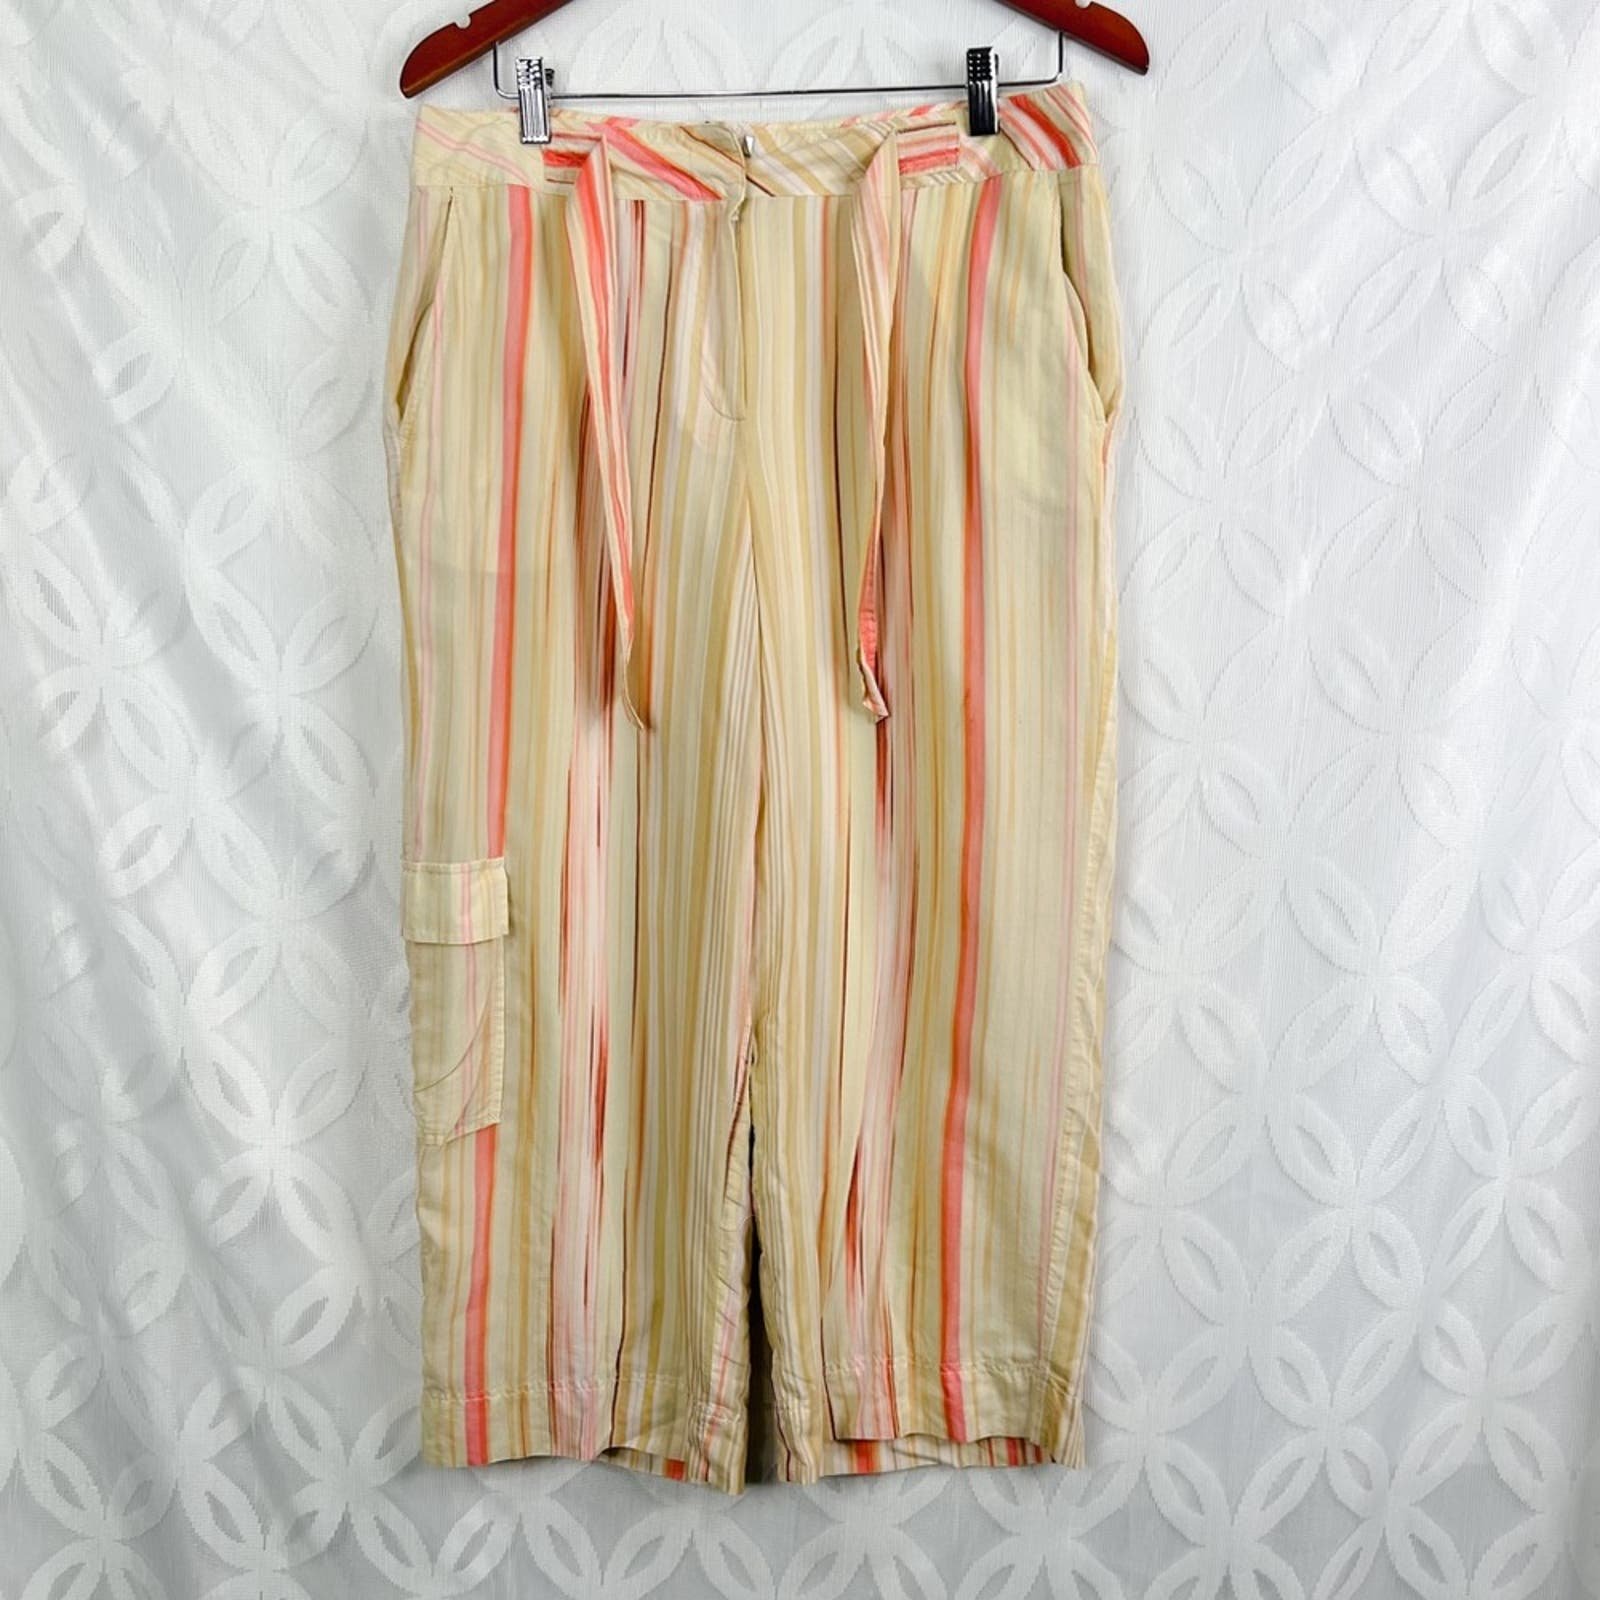 Wholesale price Tommy Bahama Ladies Linen Culottes/Gauchos Pants Size 12 hEugf5LeG Everyday Low Prices